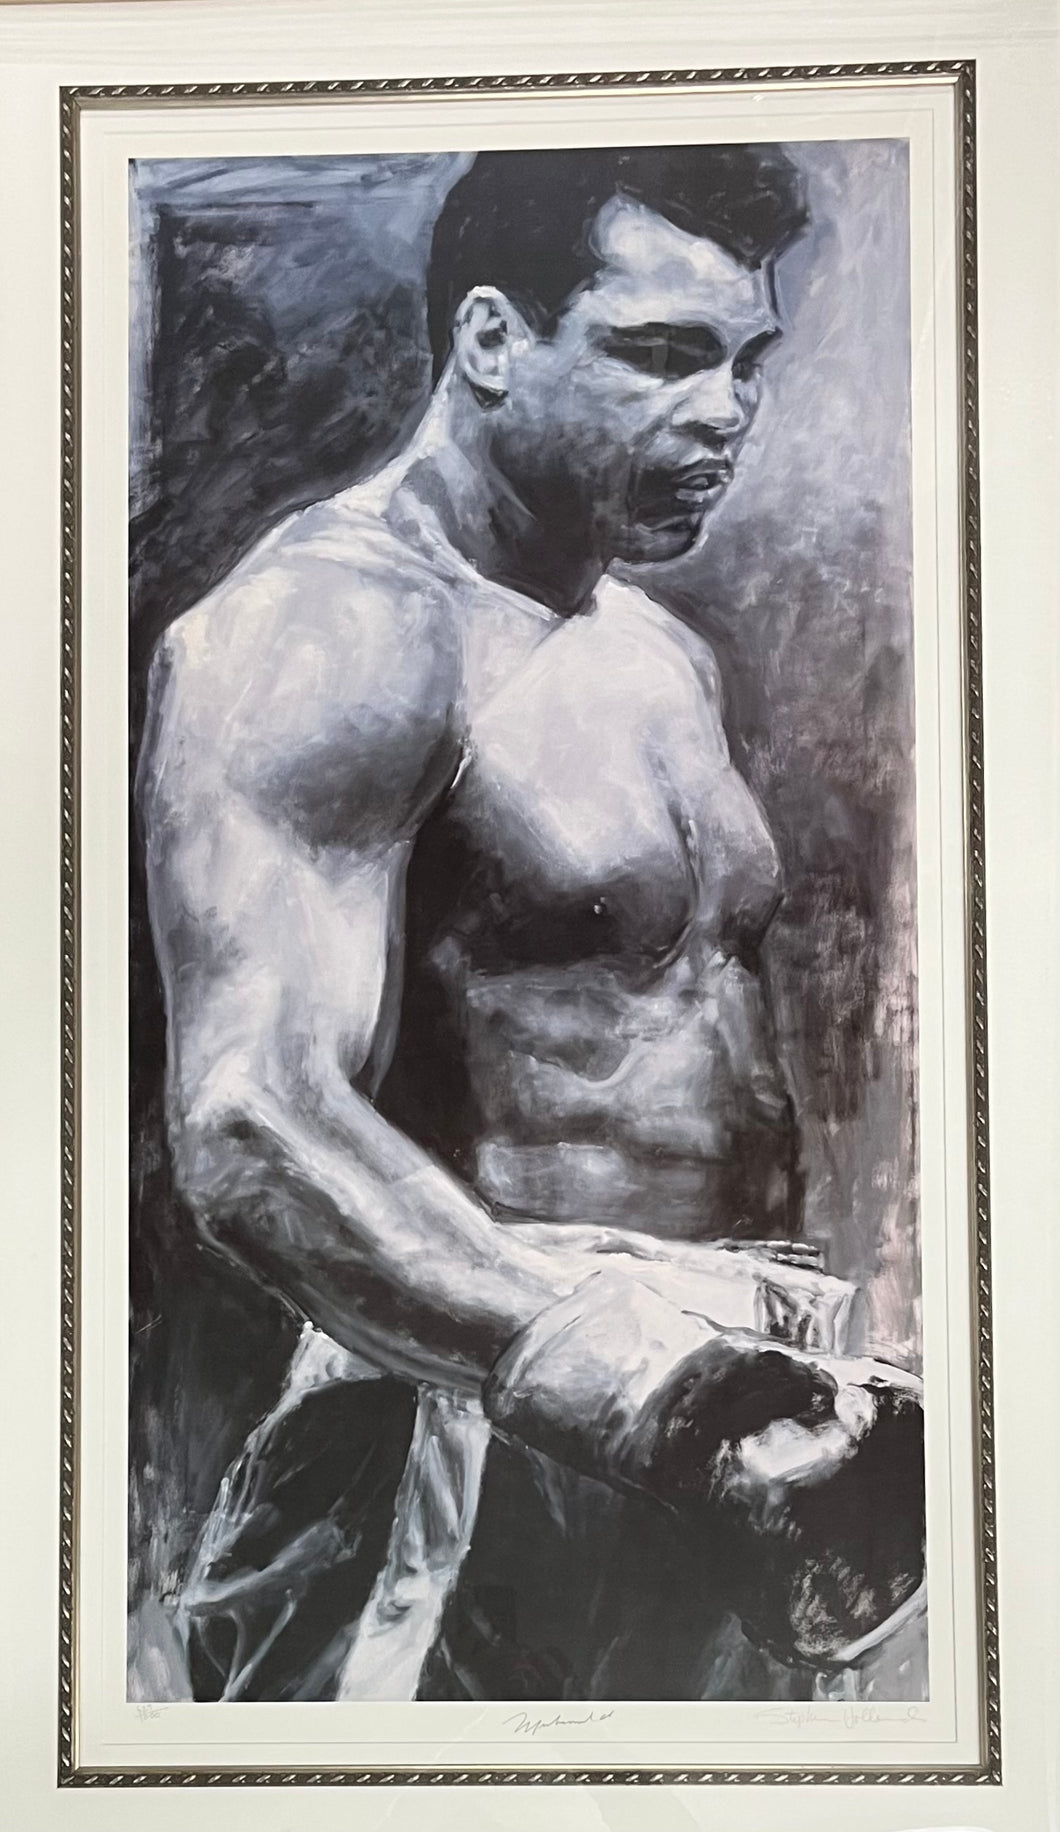 MUHAMMAD ALI Signed Stephen Holland Lithograph Display